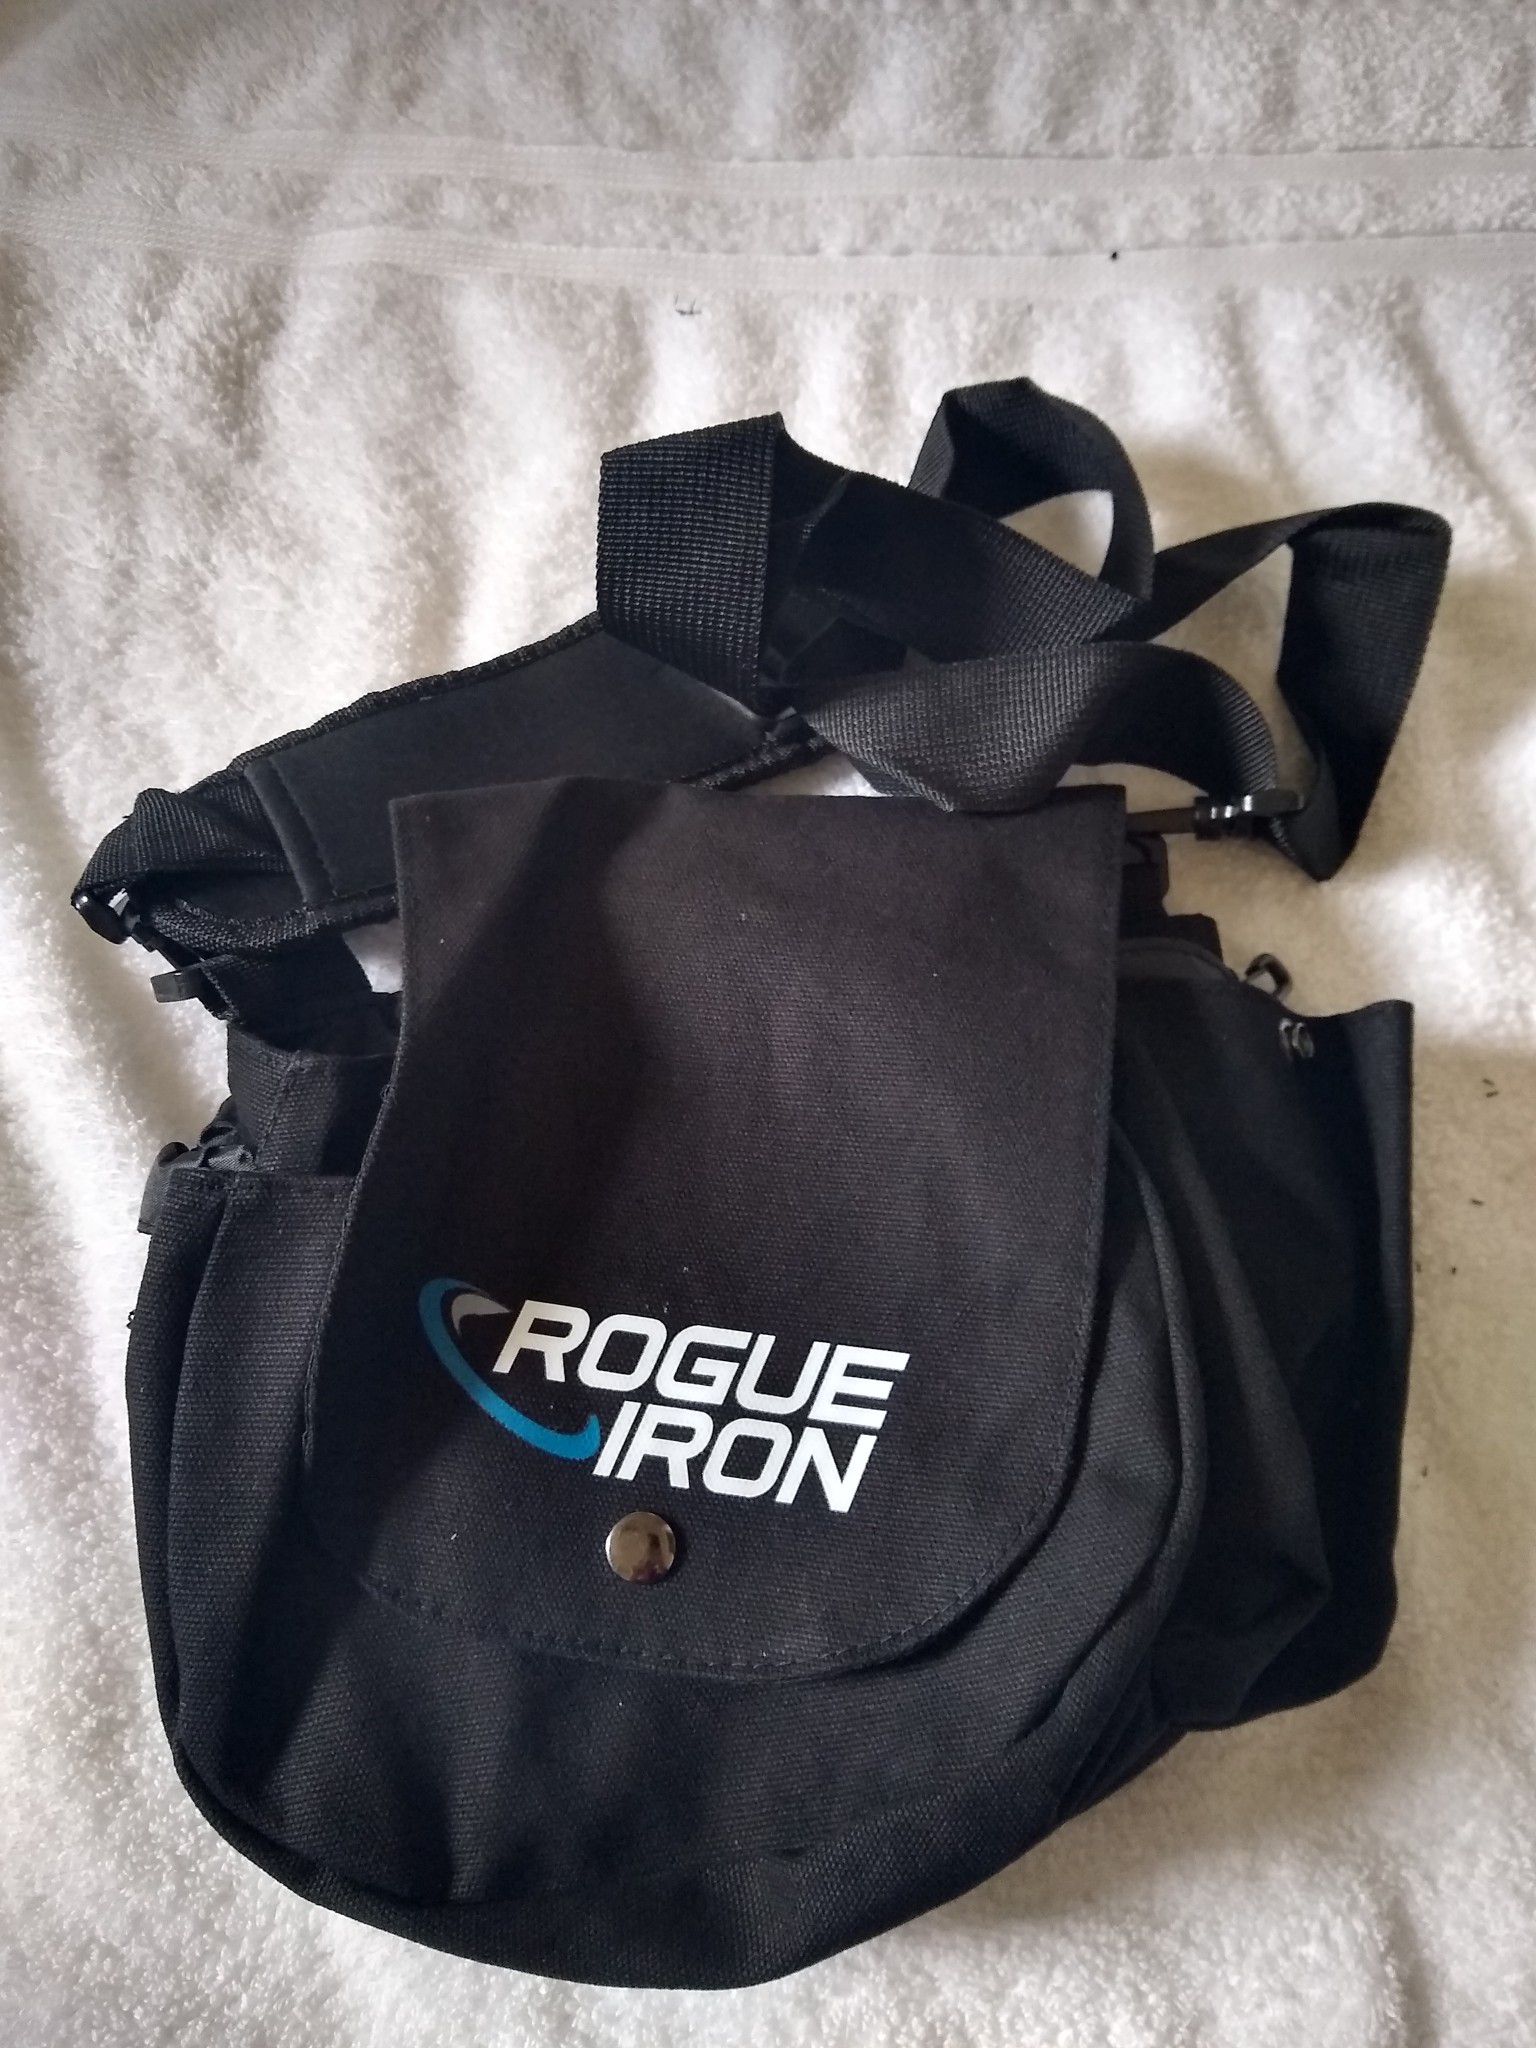 Rogue Iron Disc Golf Bag- Sling Tote Bag for Frisbee Golf - Holds 1-9 Discs, Water Bottle, and Accessories